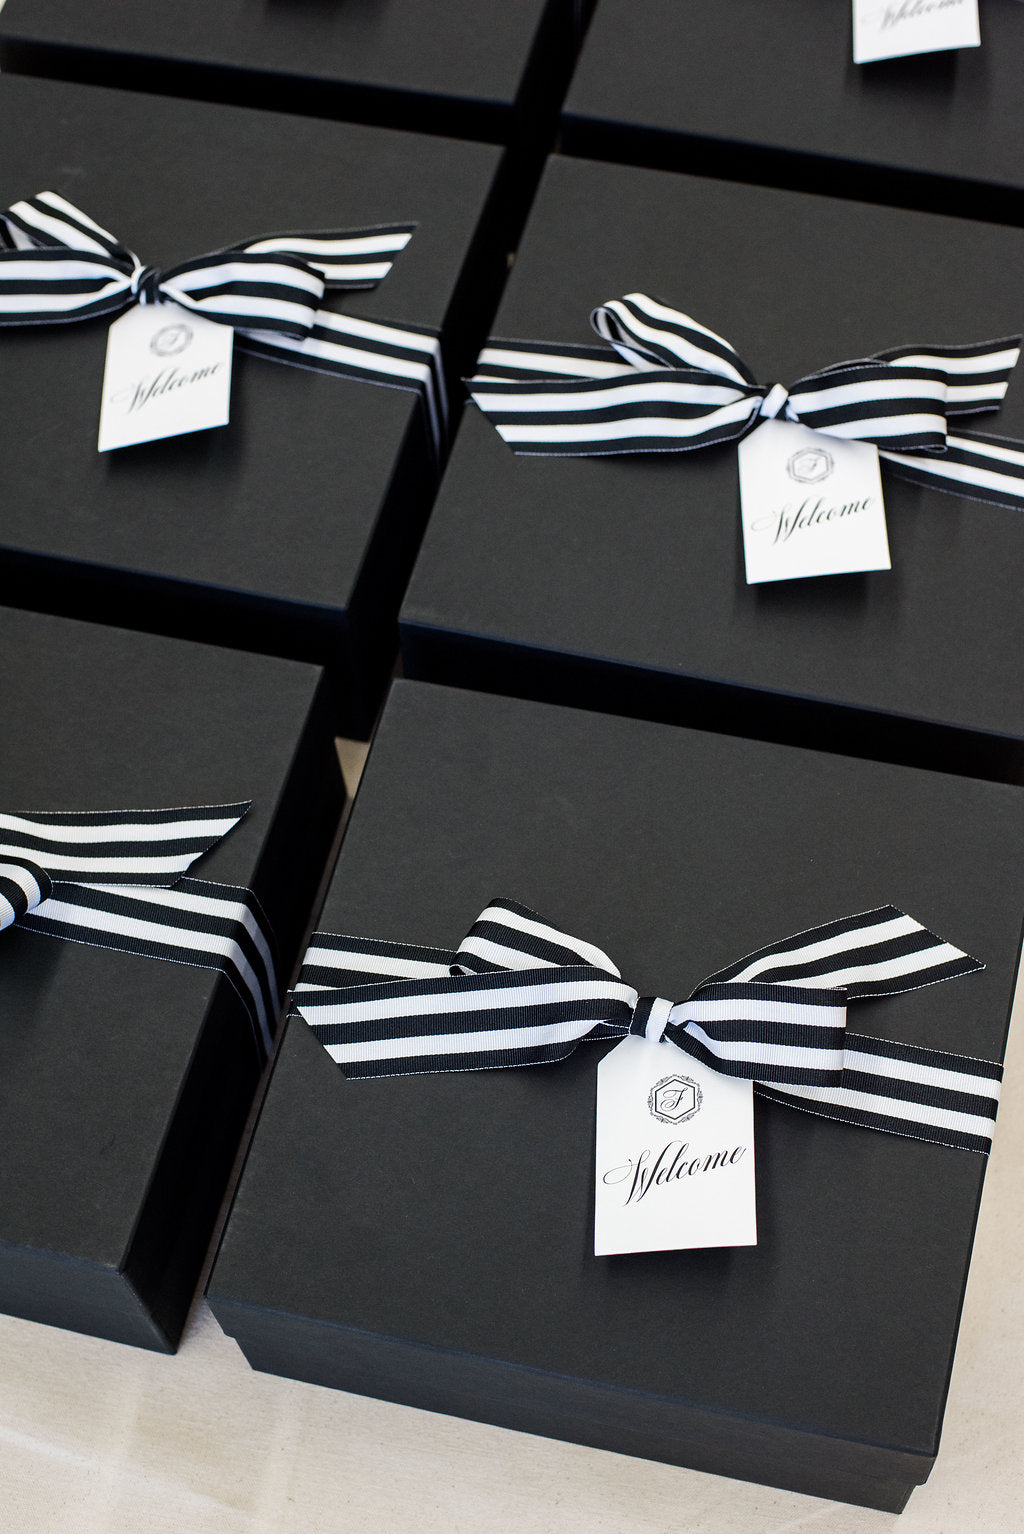 Ohio black and white wedding welcome gifts